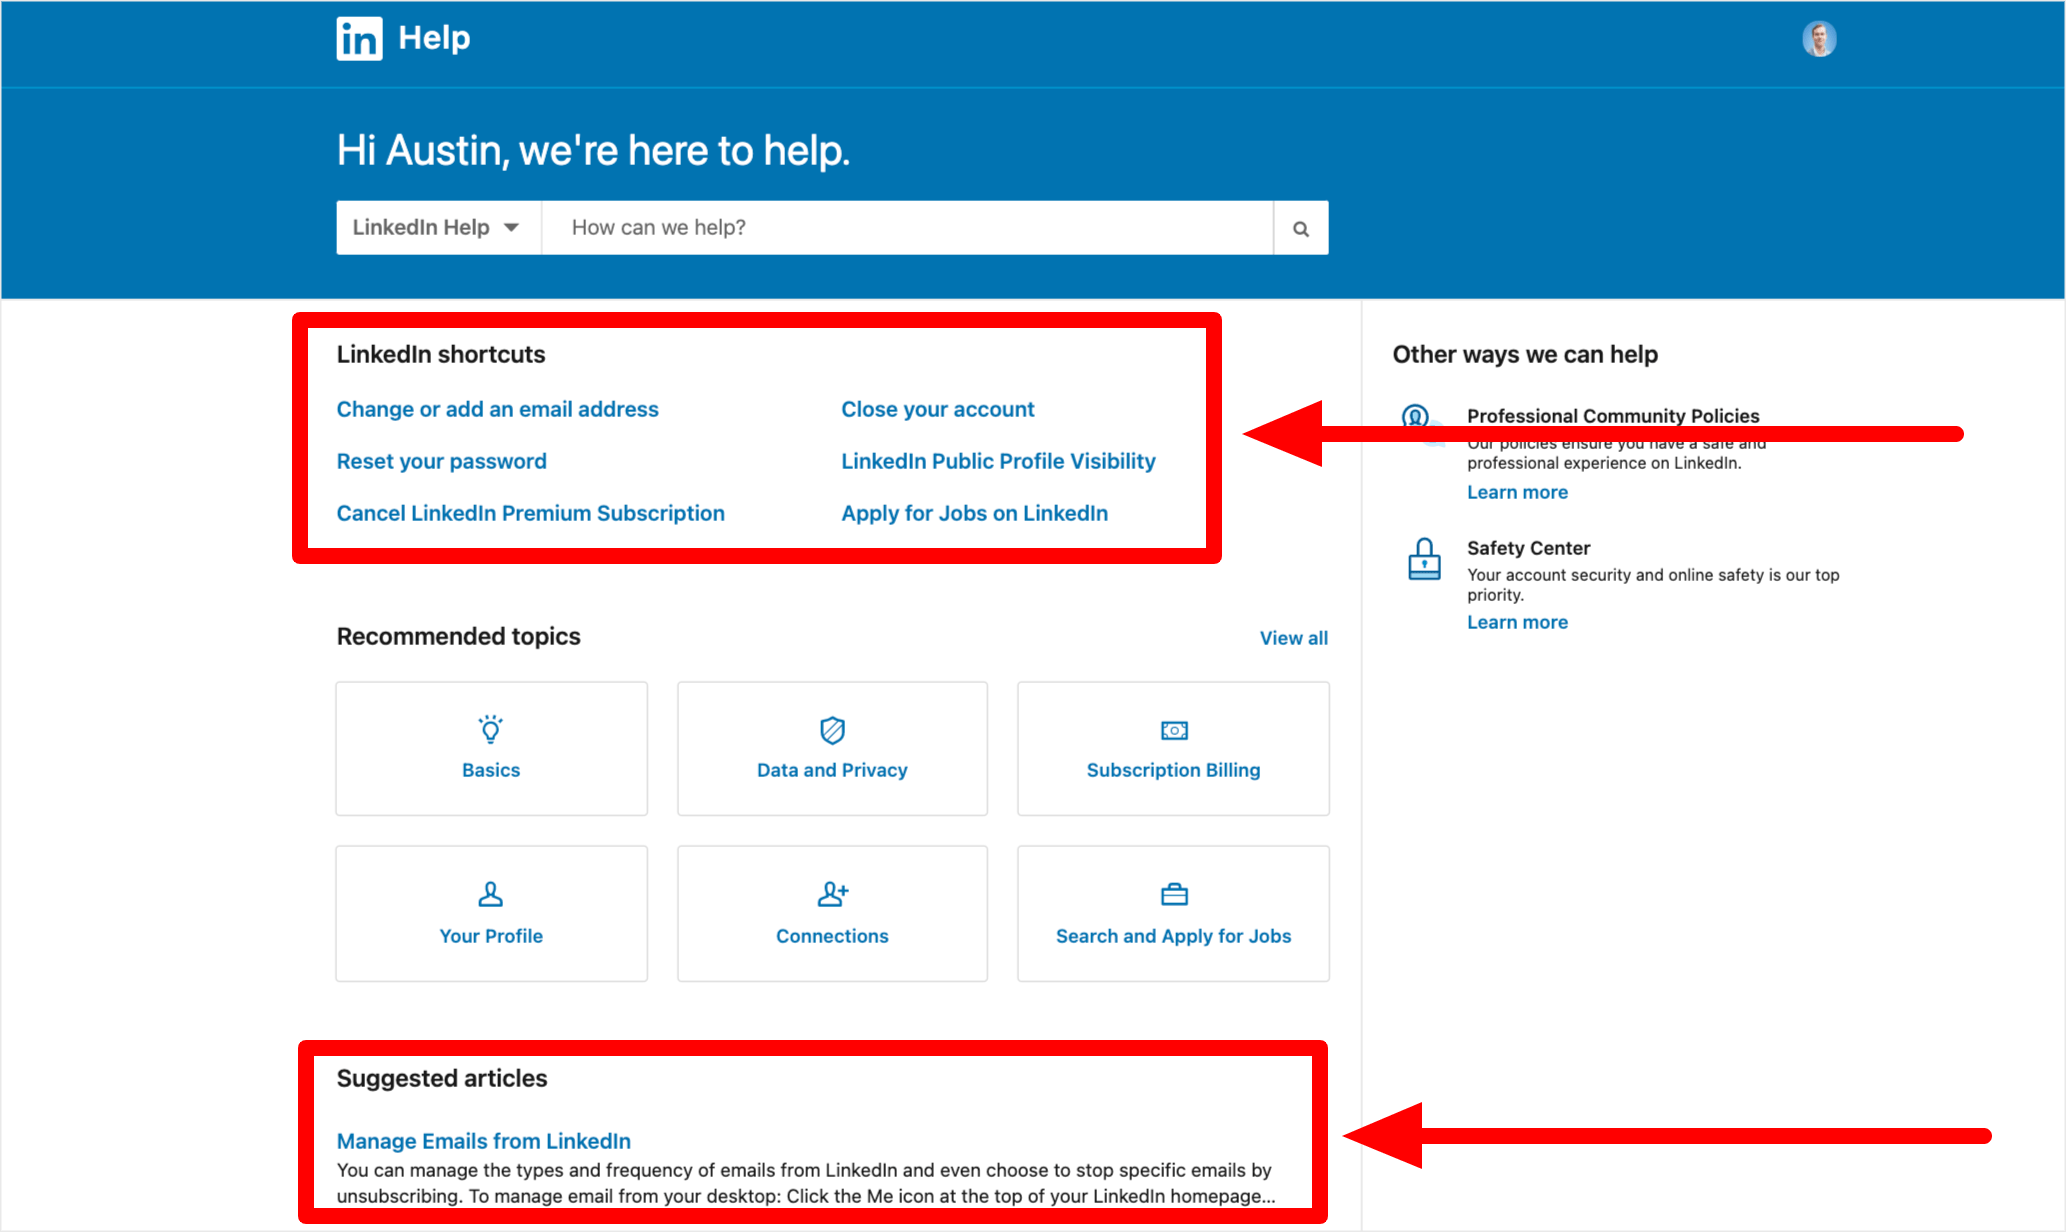 How To Select A Support Article To Access LinkedIn's Contact Support Link